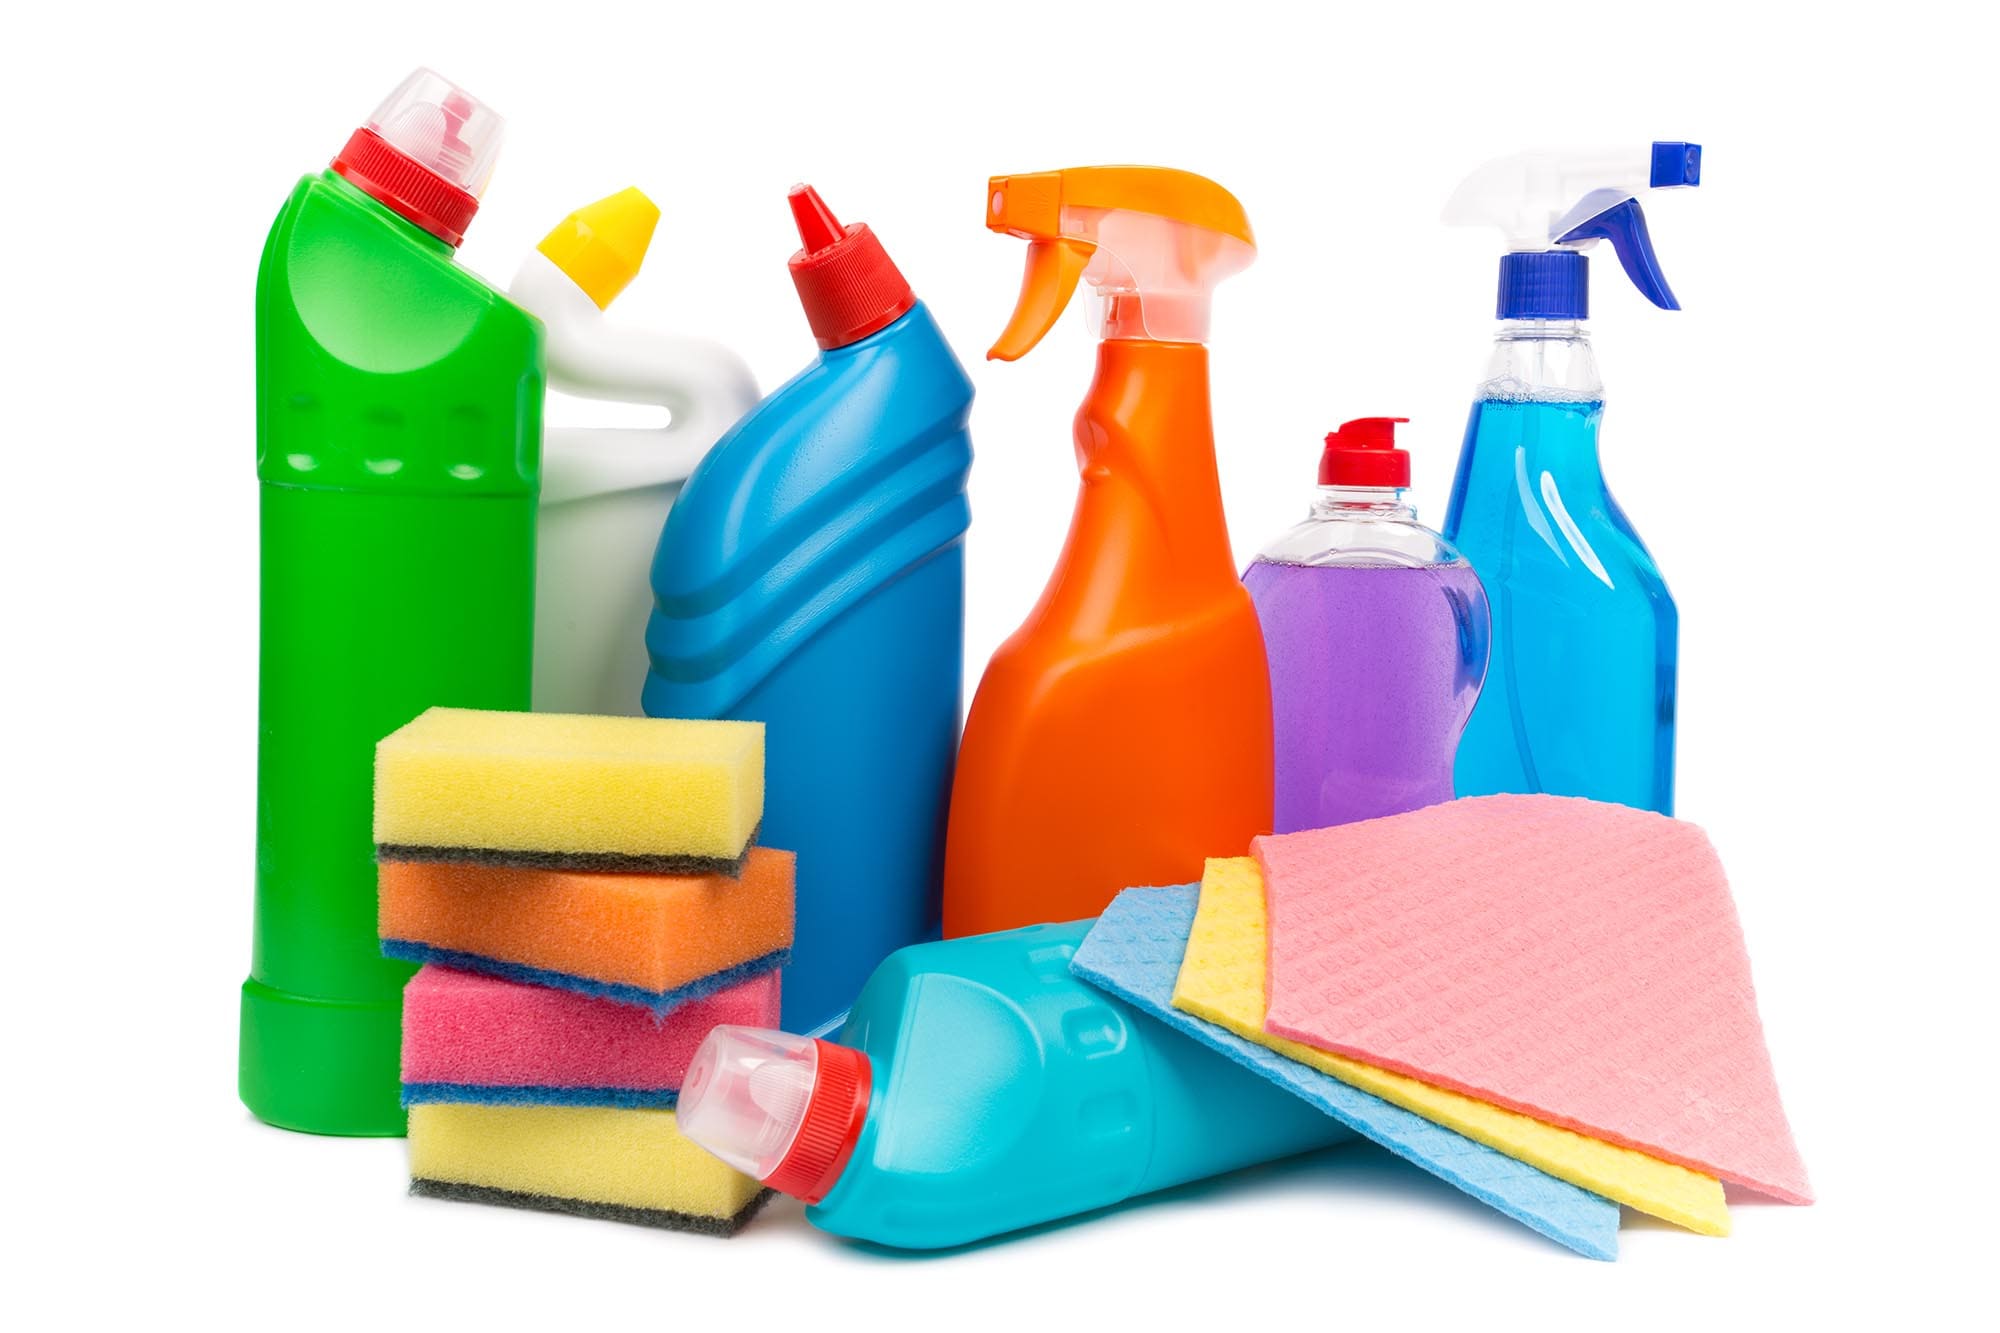 Cleaning supplies/detergents